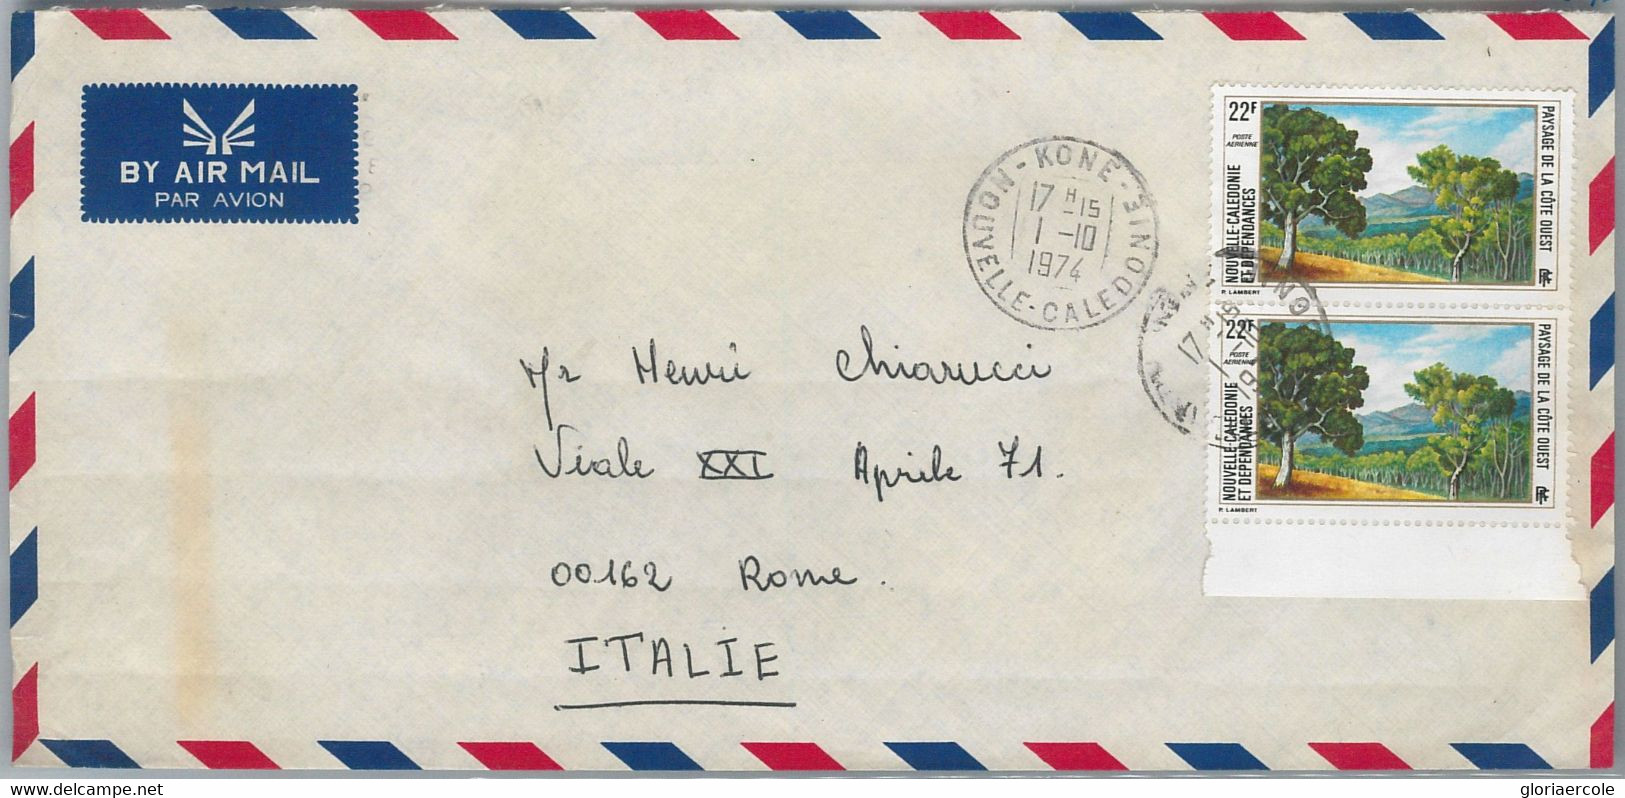 57369 - NOUVELLE CALEDONIE - POSTAL HISTORY - Airmail Cover To ITALY  1974 - Briefe U. Dokumente